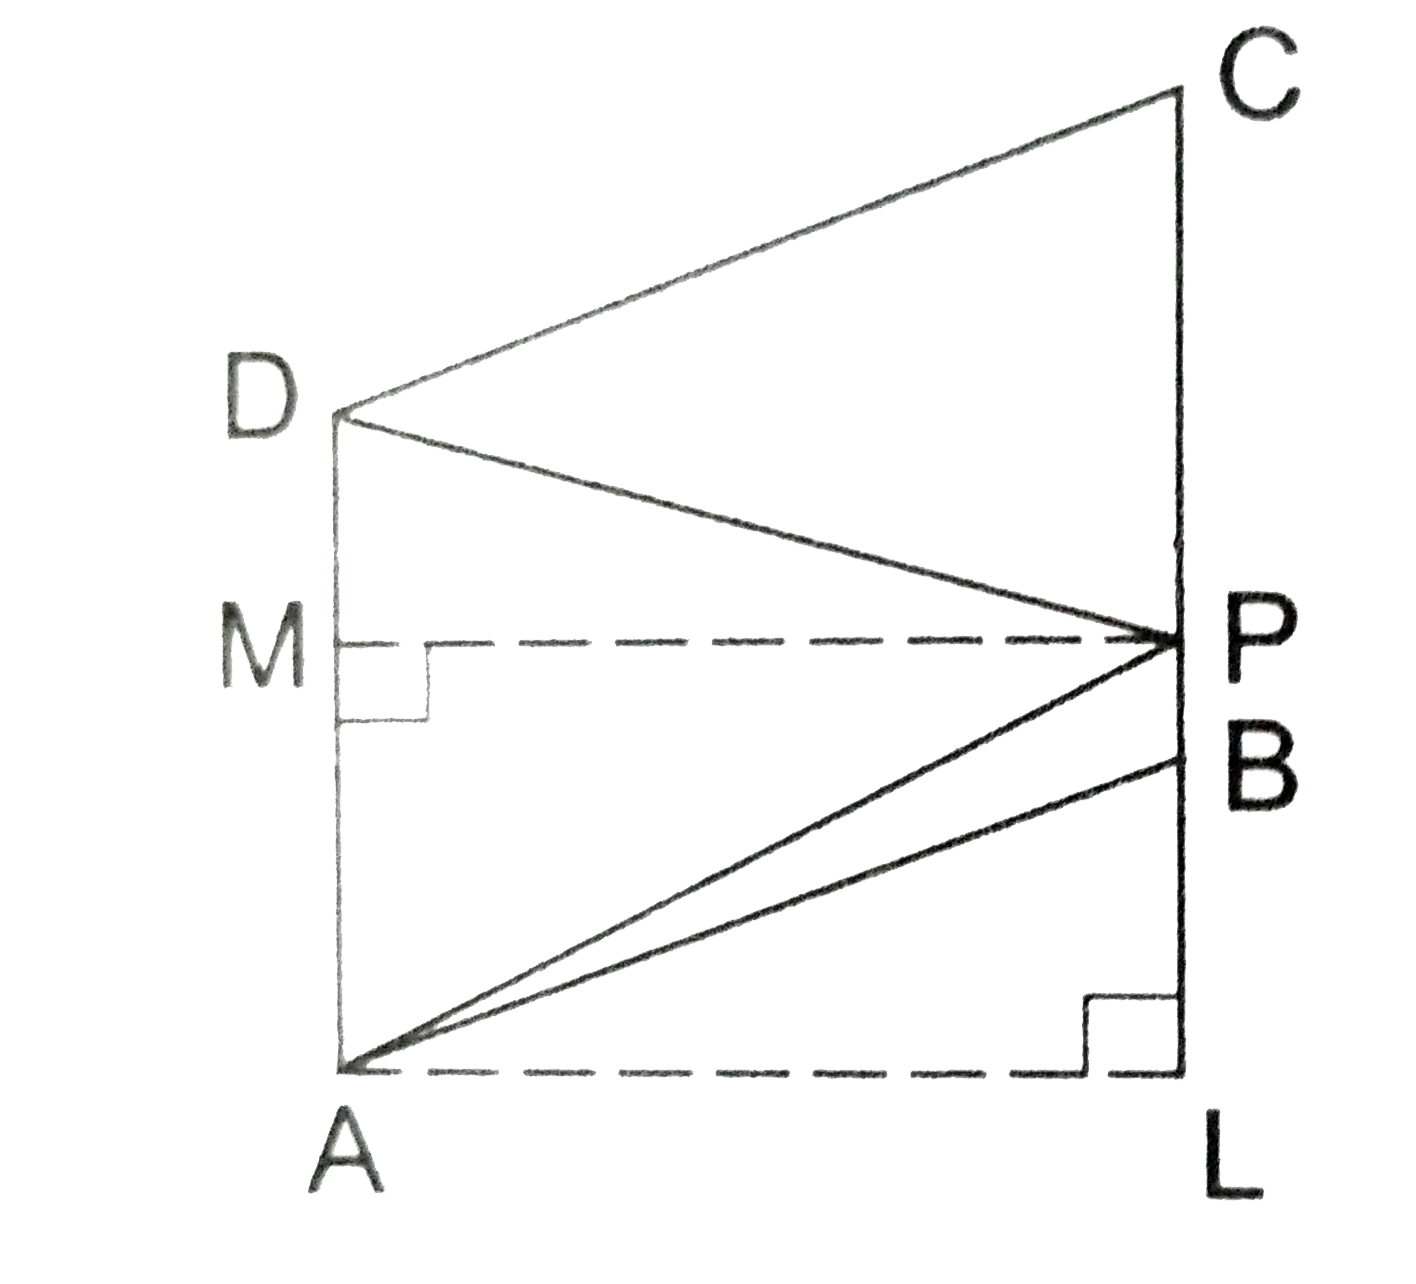 In the adjoining figure, ABCD is a parallelogram and P is any points on BC. Prove that    ar(triangleABP)+ar(triangleDPC)=ar(trianglePDA).